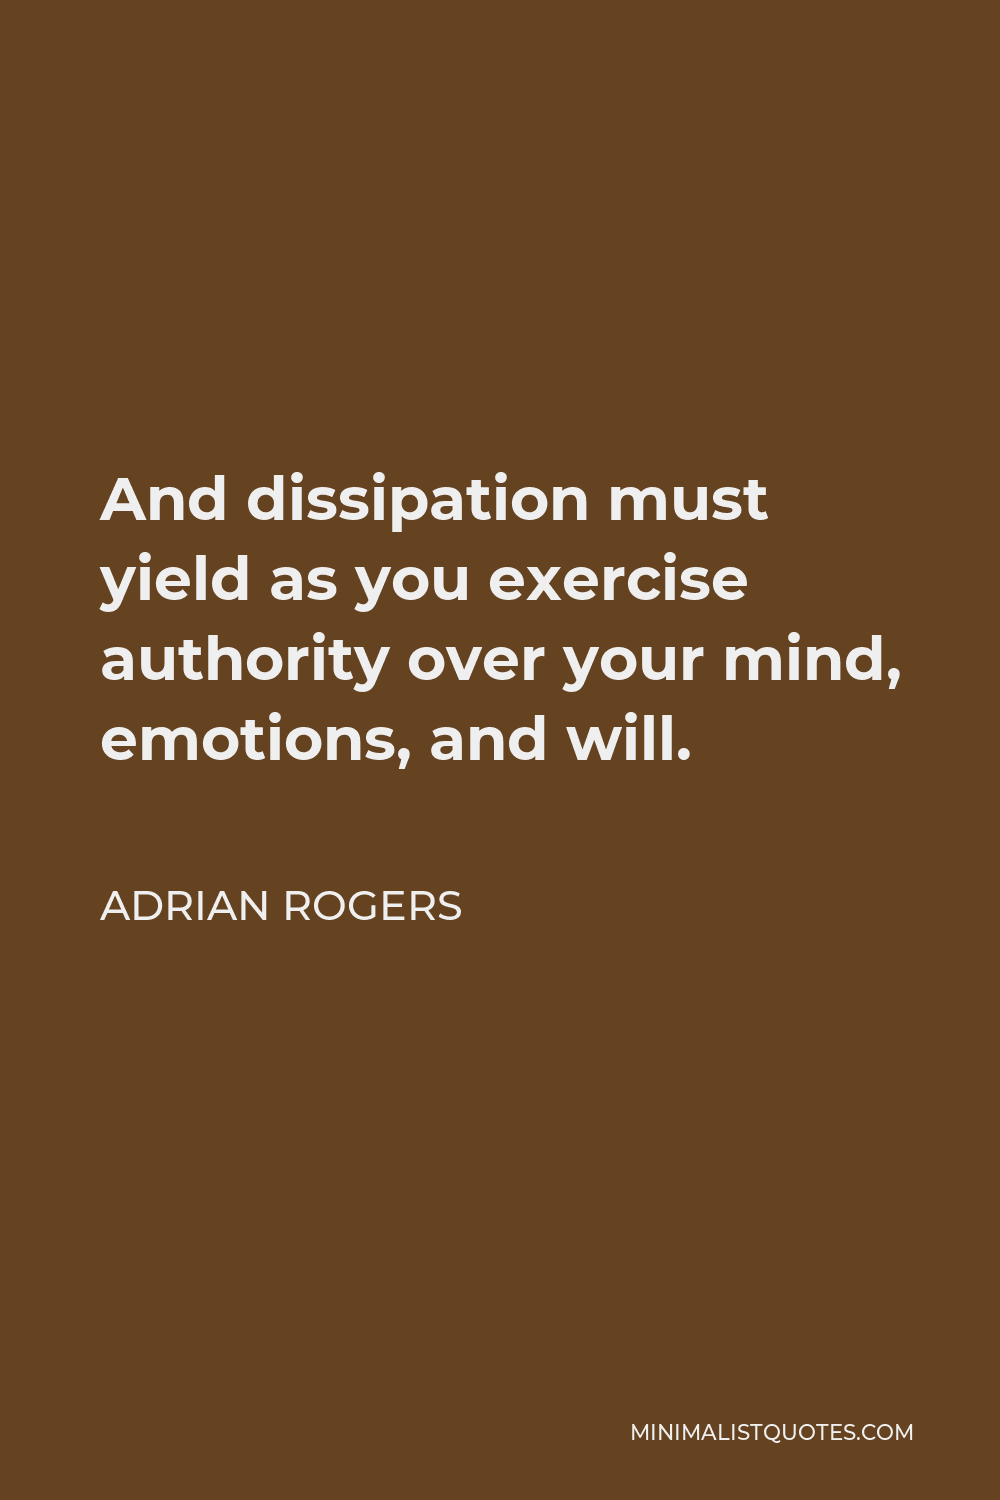 Adrian Rogers Quote - And dissipation must yield as you exercise authority over your mind, emotions, and will.